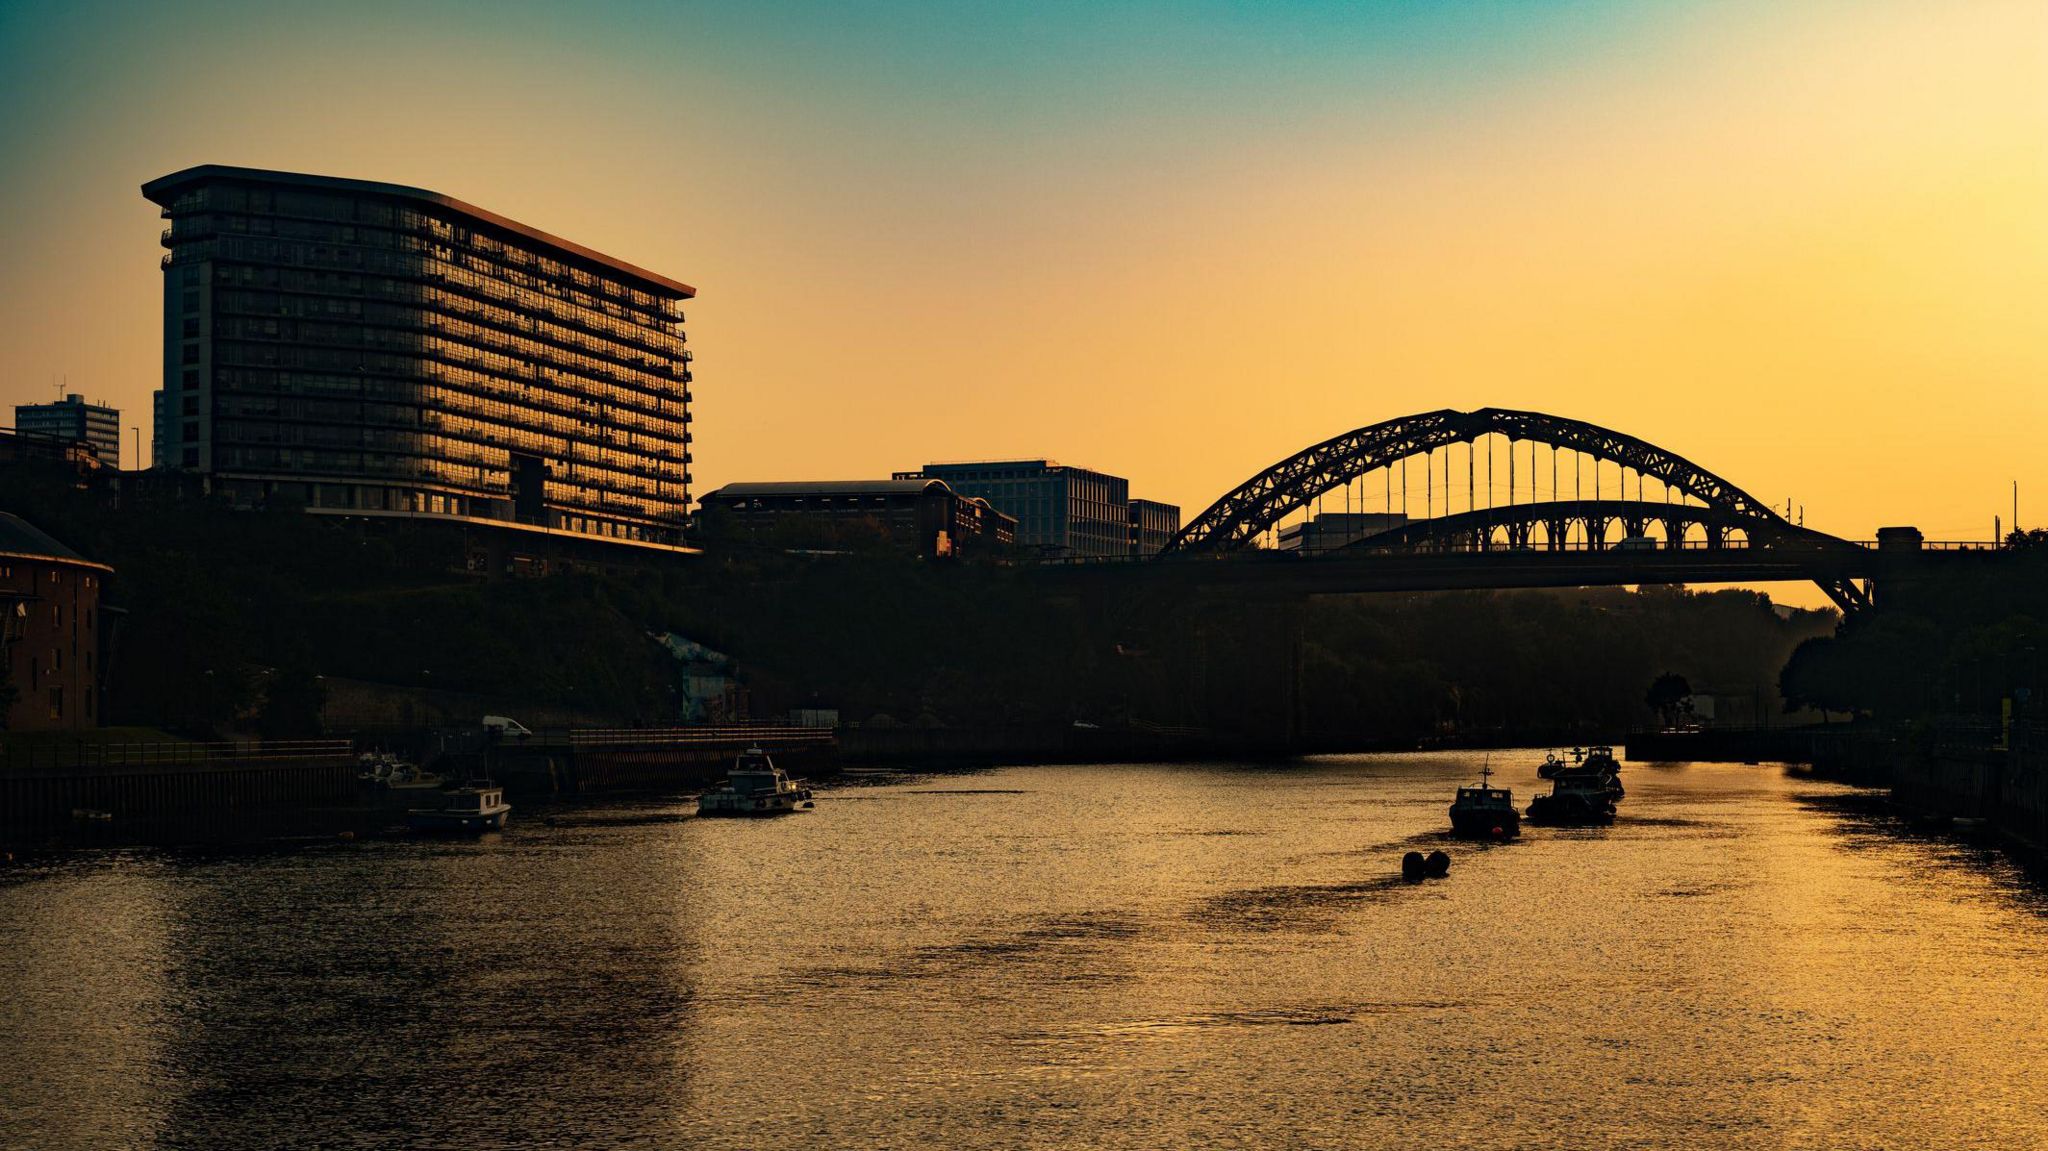 A building and bridge silhouetted against a yellow sunrise